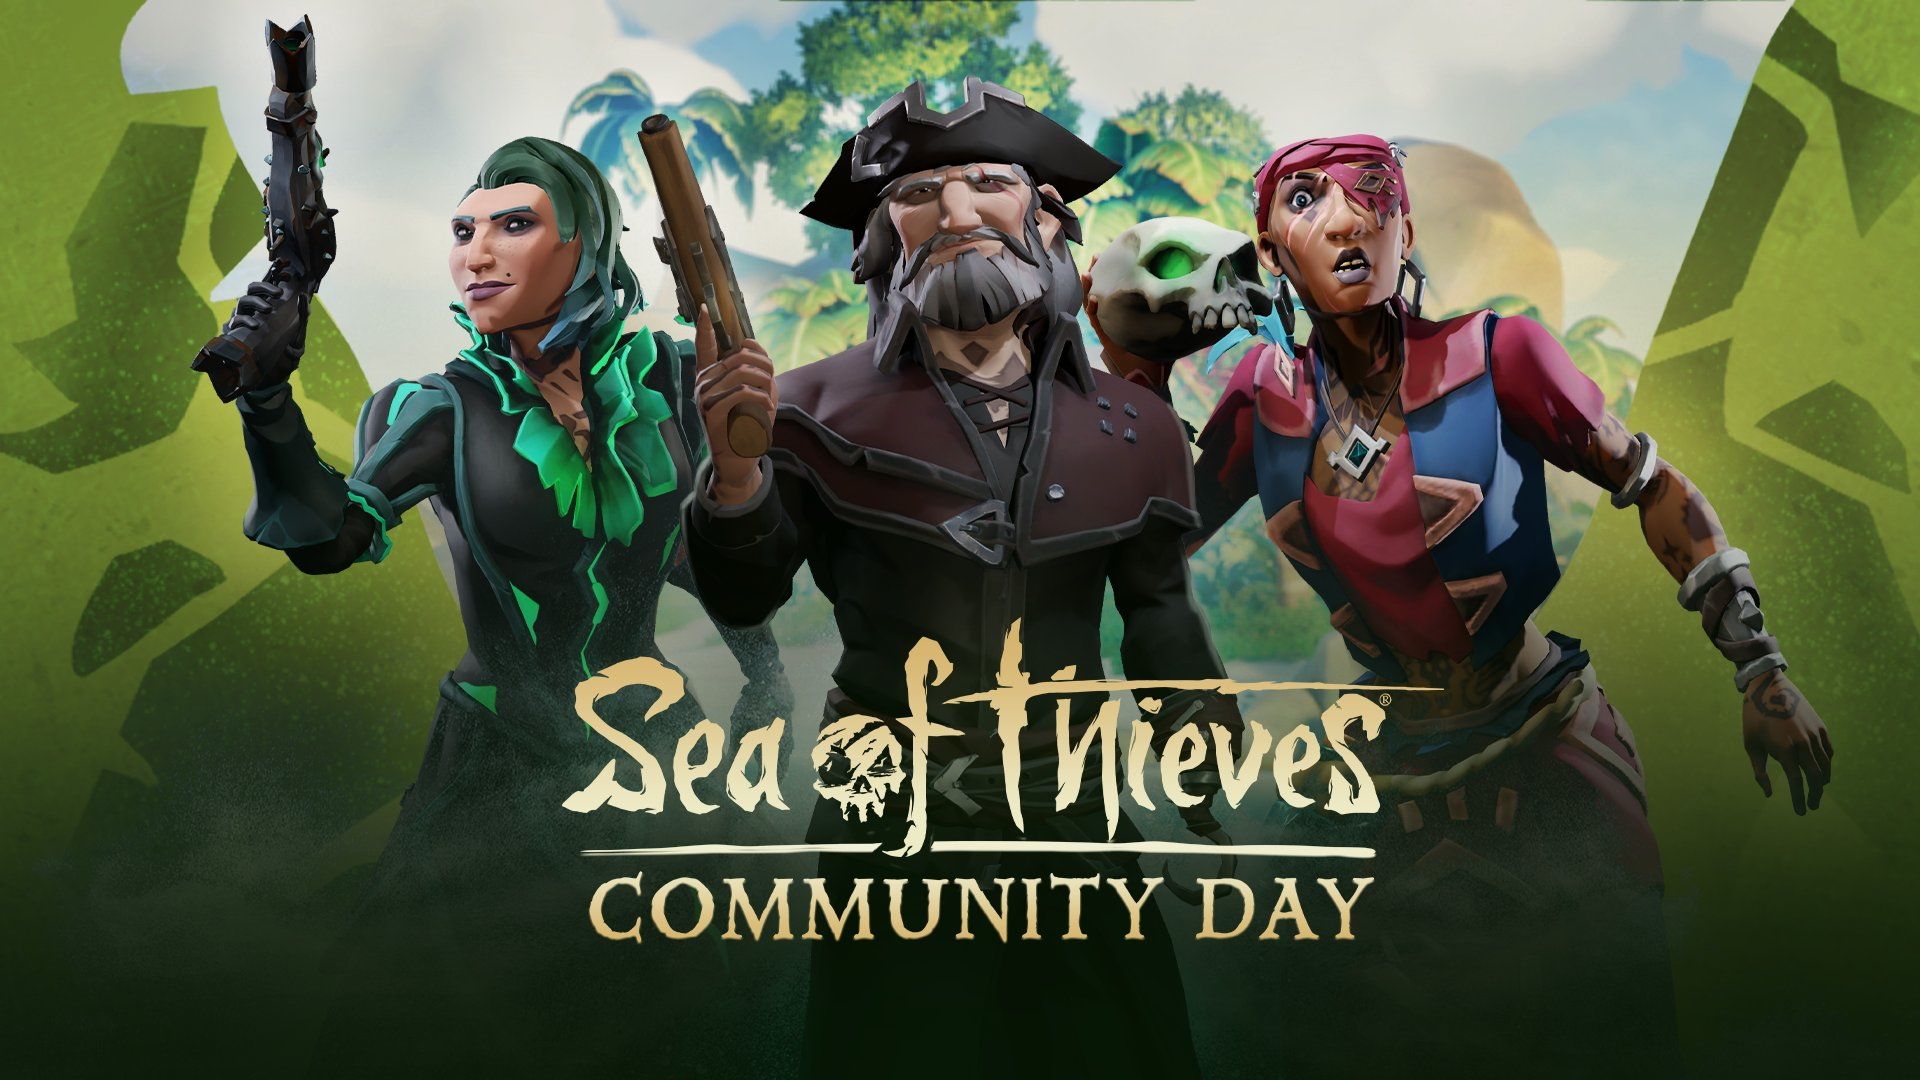 Community Day image with three pirates from Sea Of Thieves